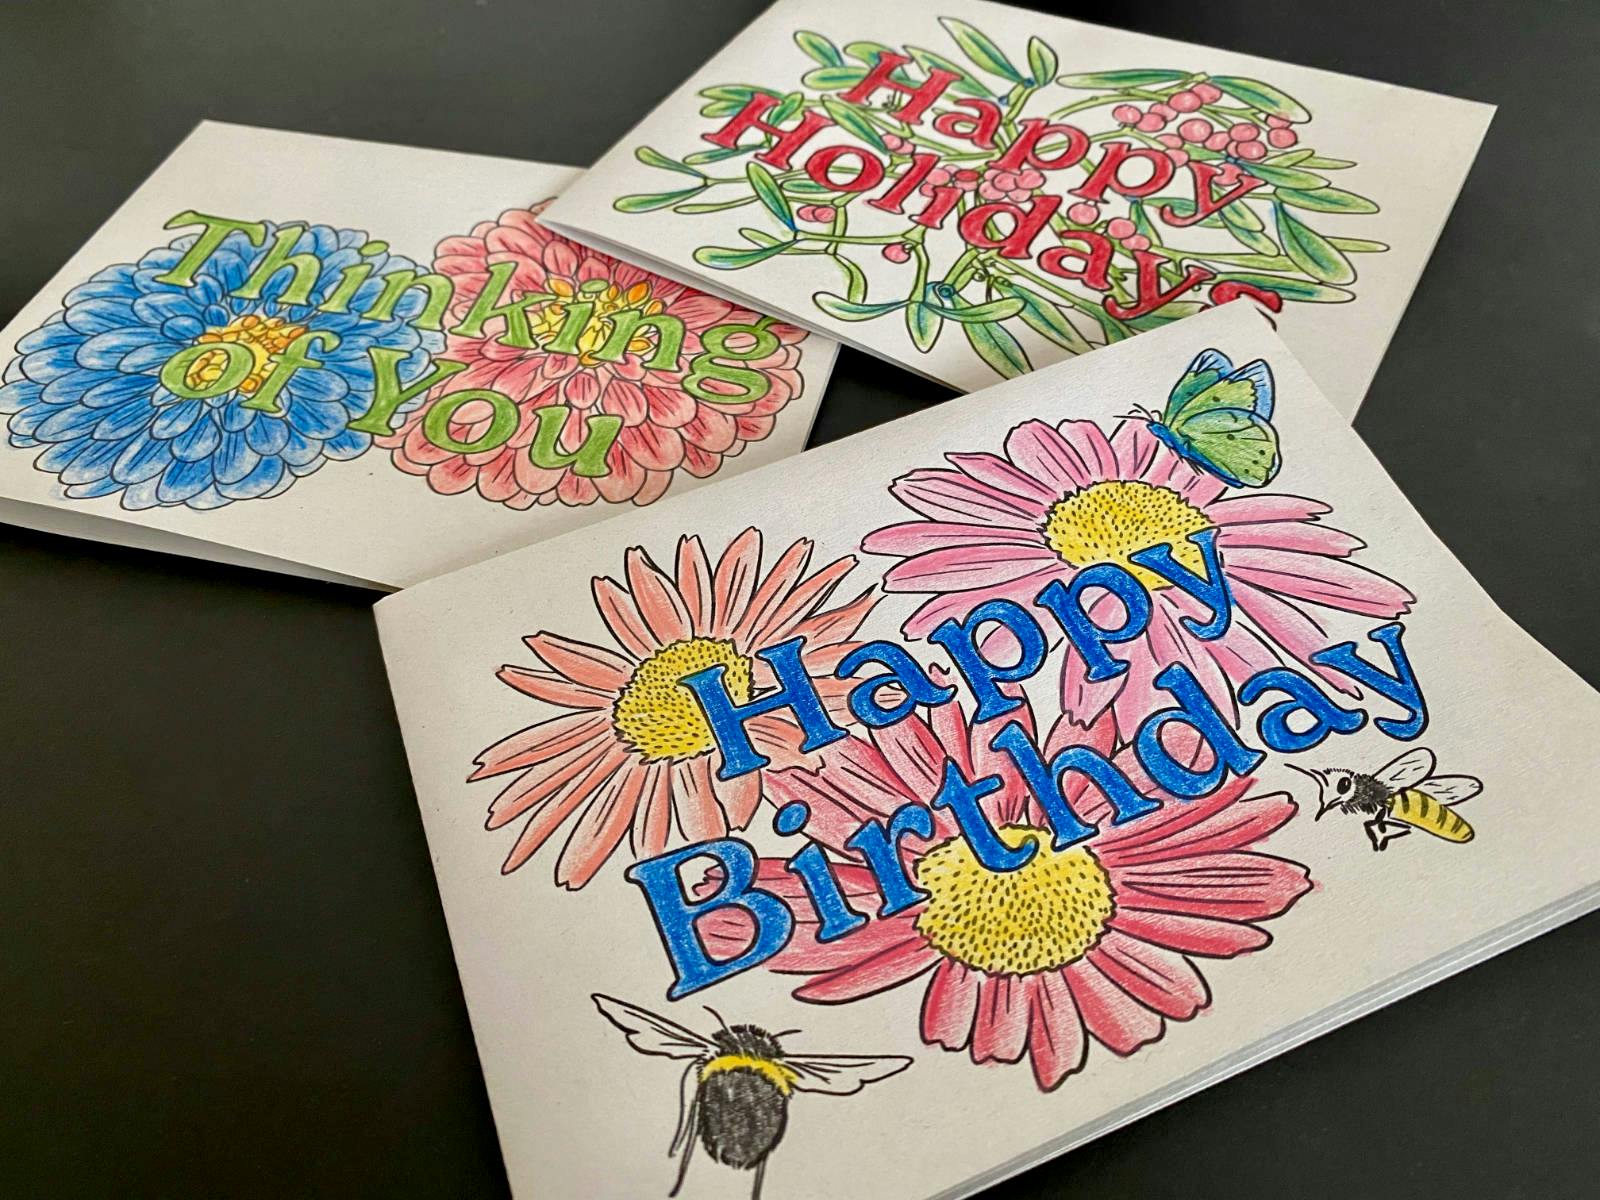 Three handmade cards lay against a black background — one that says “Happy Birthday” one that says “Thinking of You” and the other that says “Happy Holidays”. They have been printed at home and colored in using pencil crayons. You can make these yourself by scrolling to the bottom of the post and downloading the templates for free.